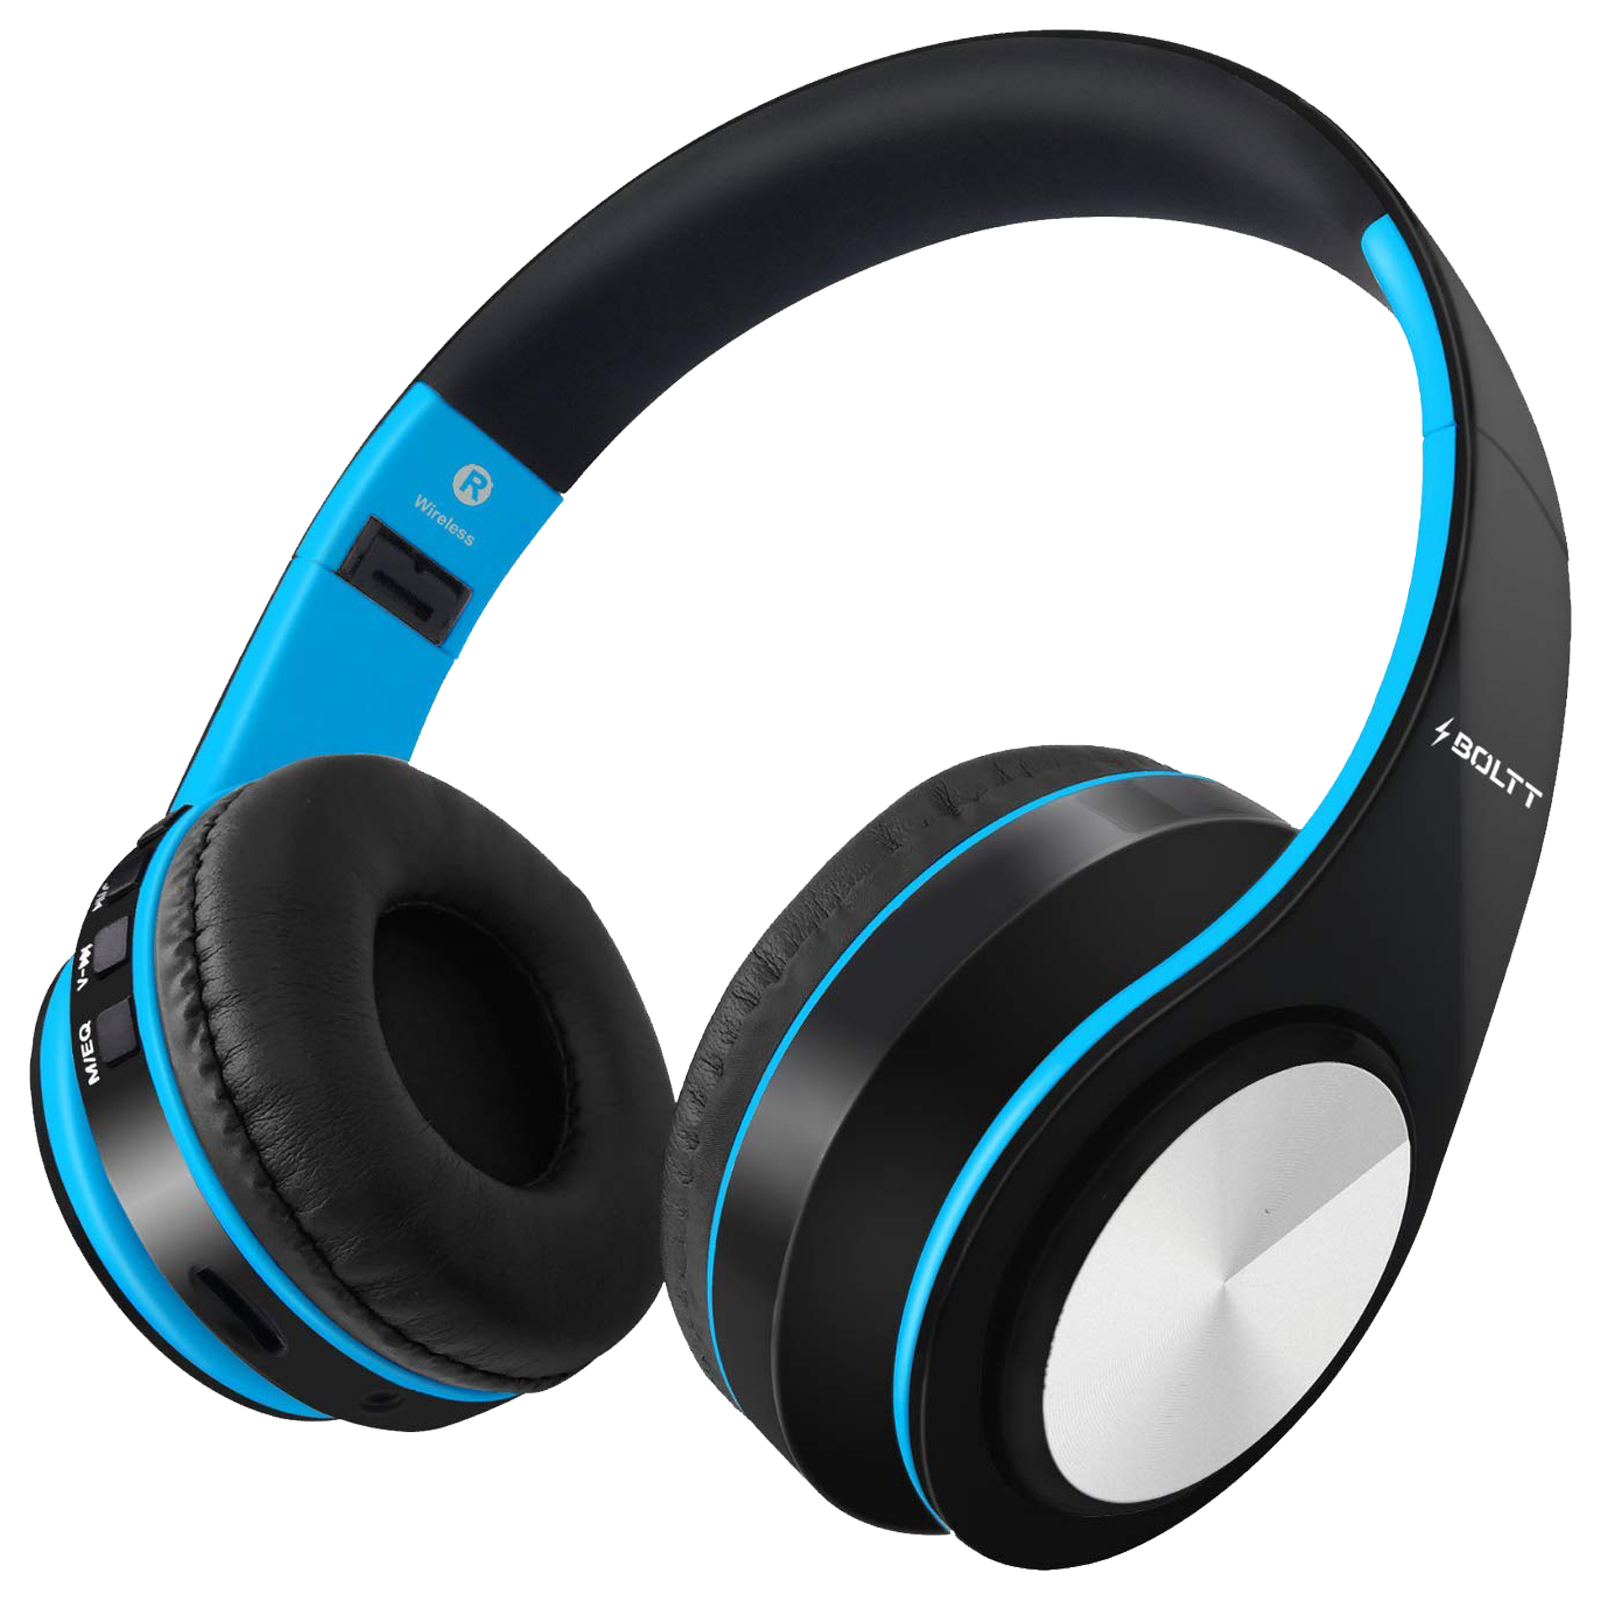 Fire-Boltt BH1001 BH1000 On-Ear Noise Isolation Wireless Headphone with Mic (Bluetooth 5.0, Exceptional Sound with Great Bass, Blue)